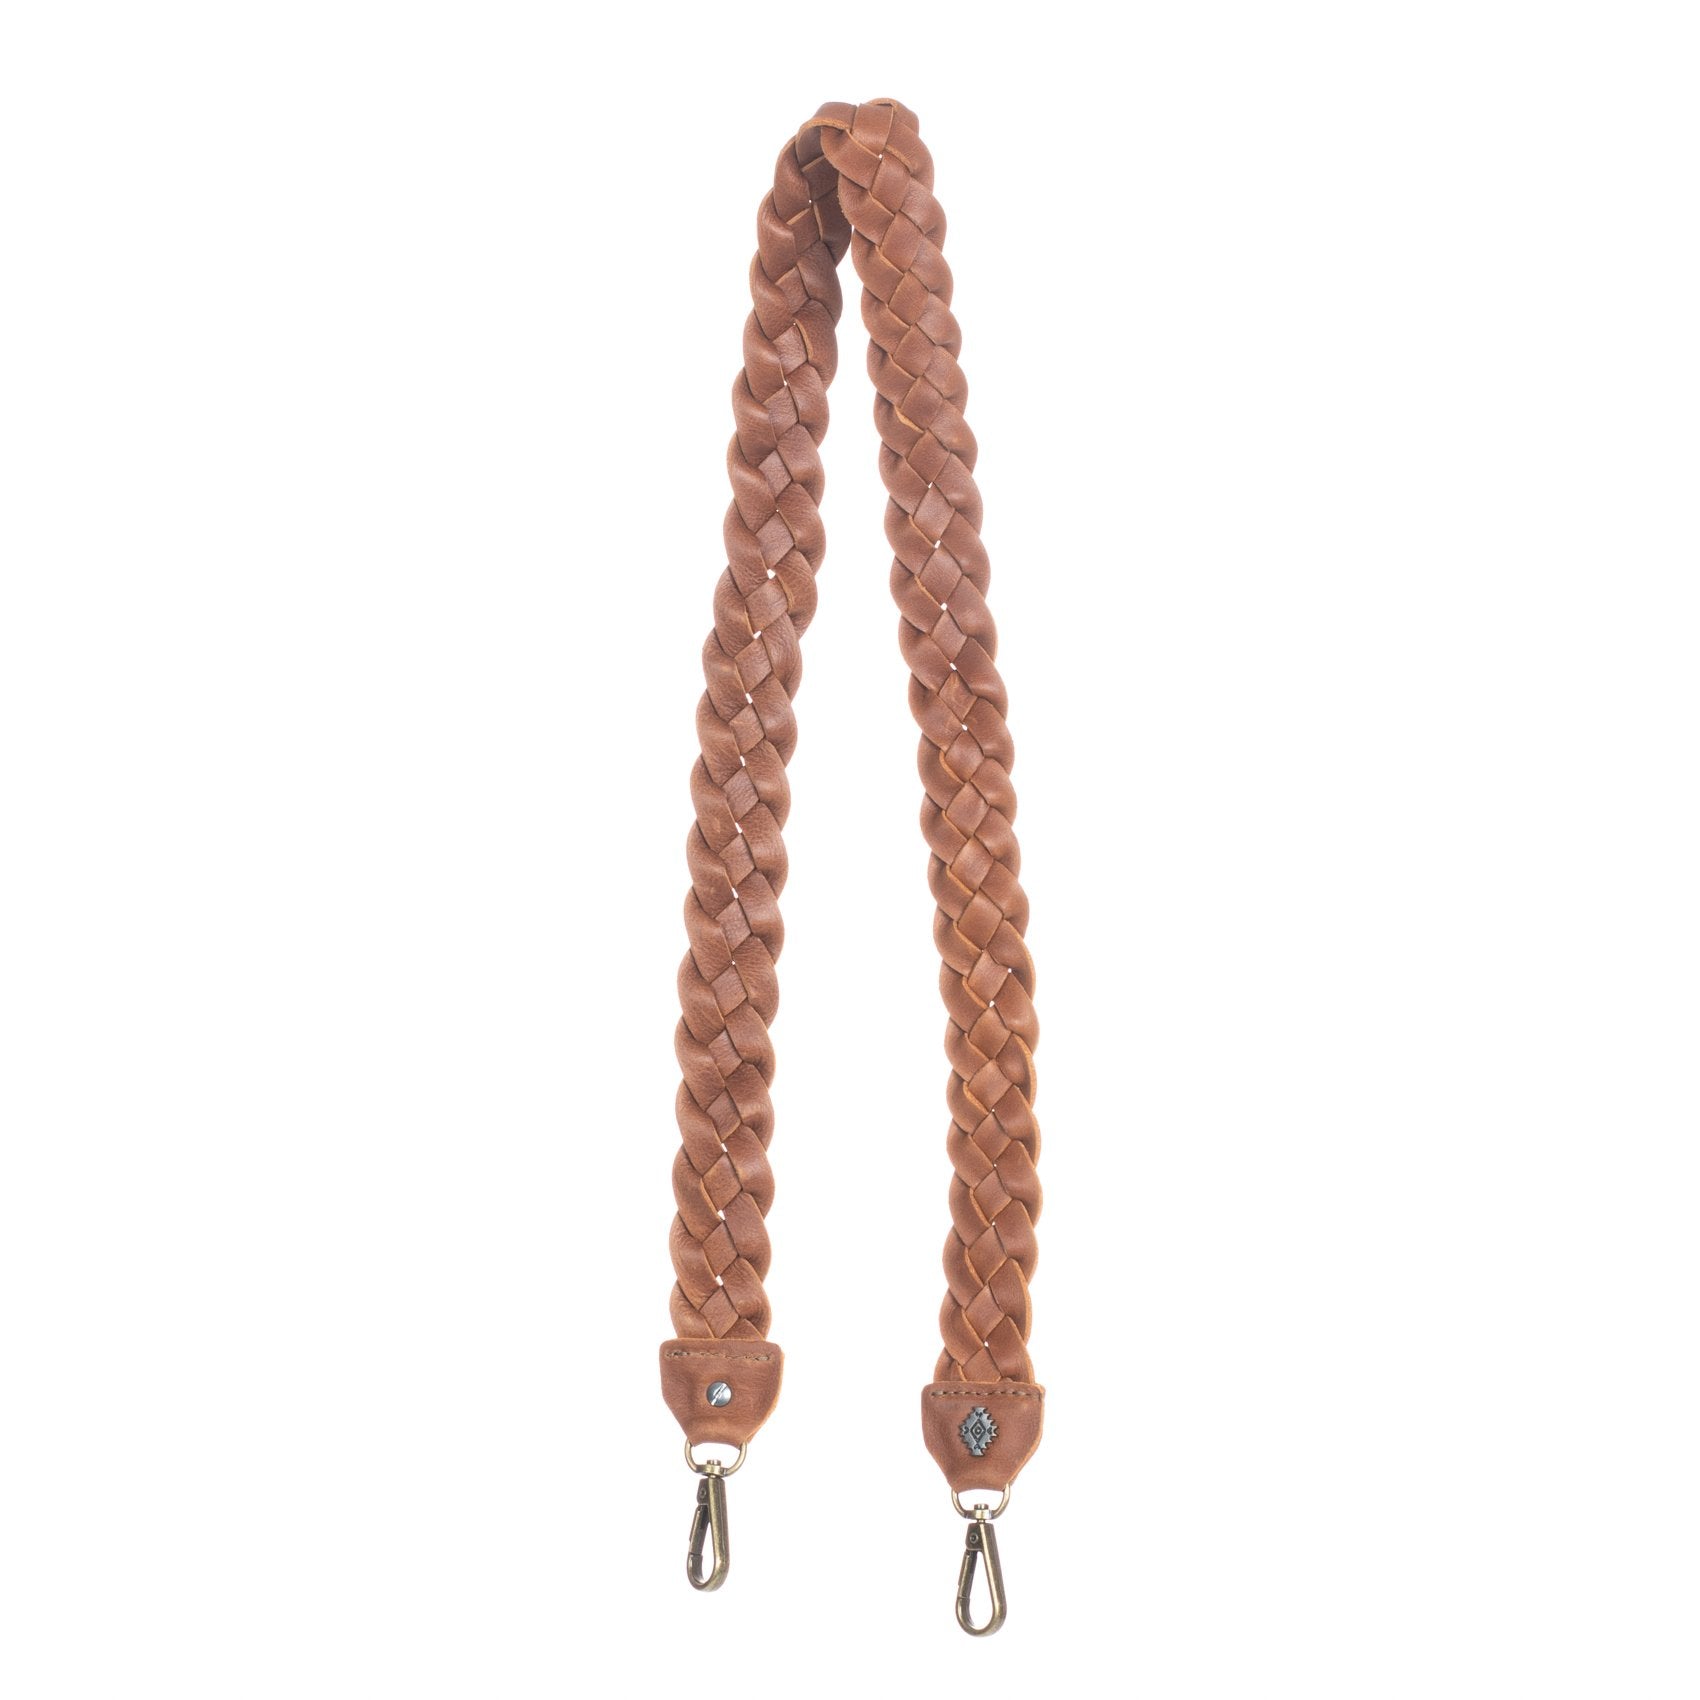 Mcraft® Brown Leather Cross Body Strap Extender 16mm Wide. 